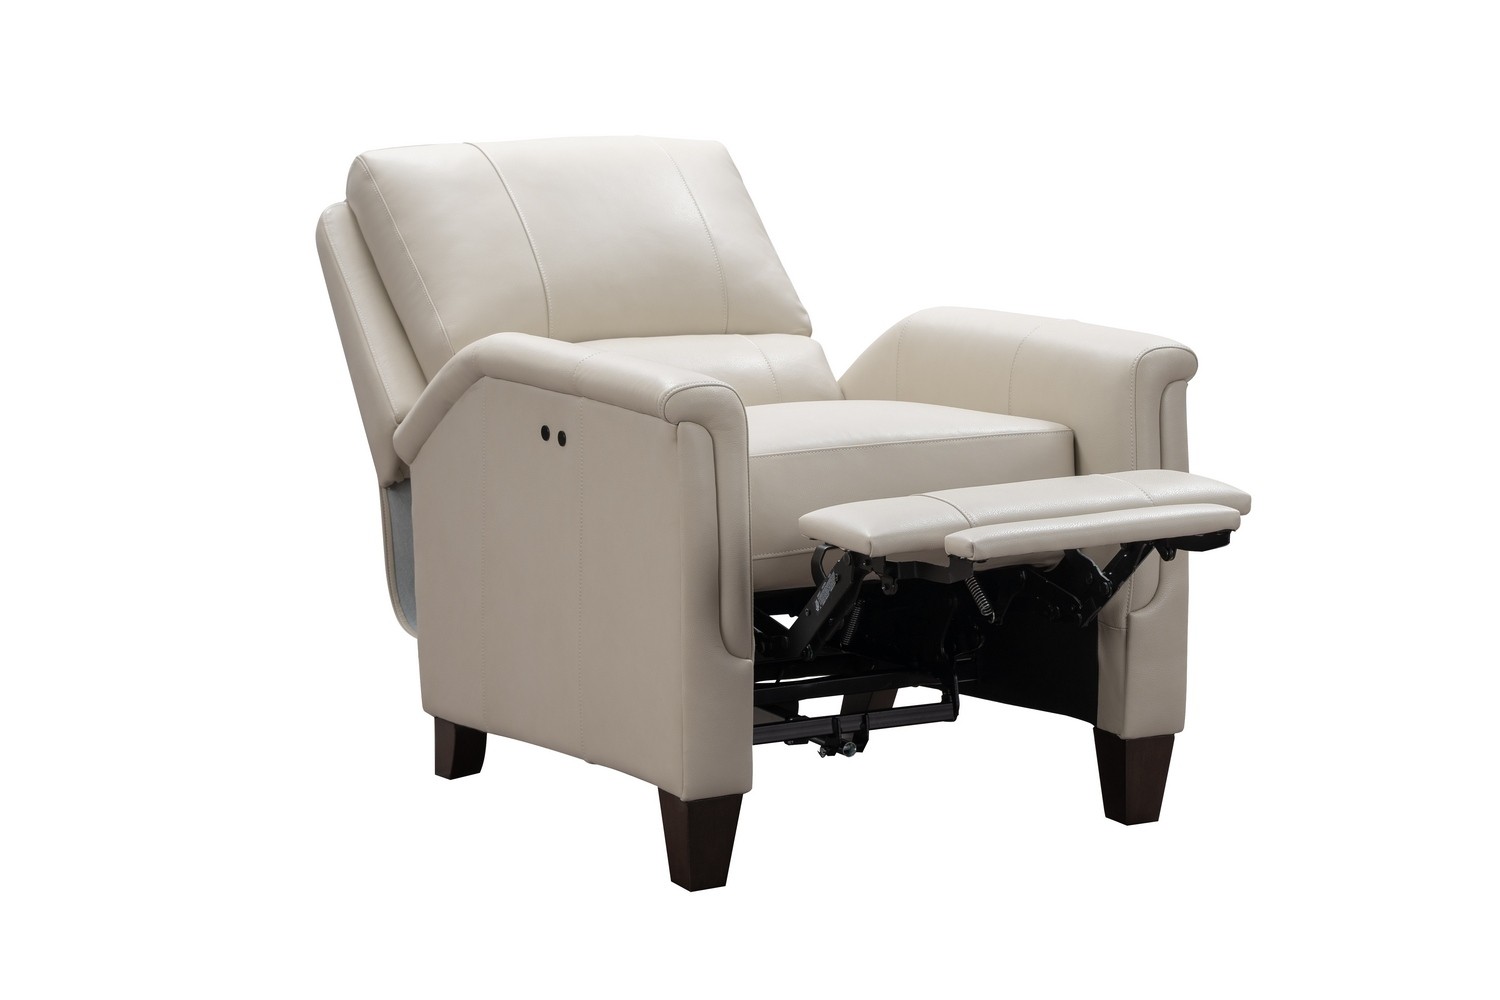 Barcalounger Quinn Power Recliner Chair - Barone Parchment/All Leather